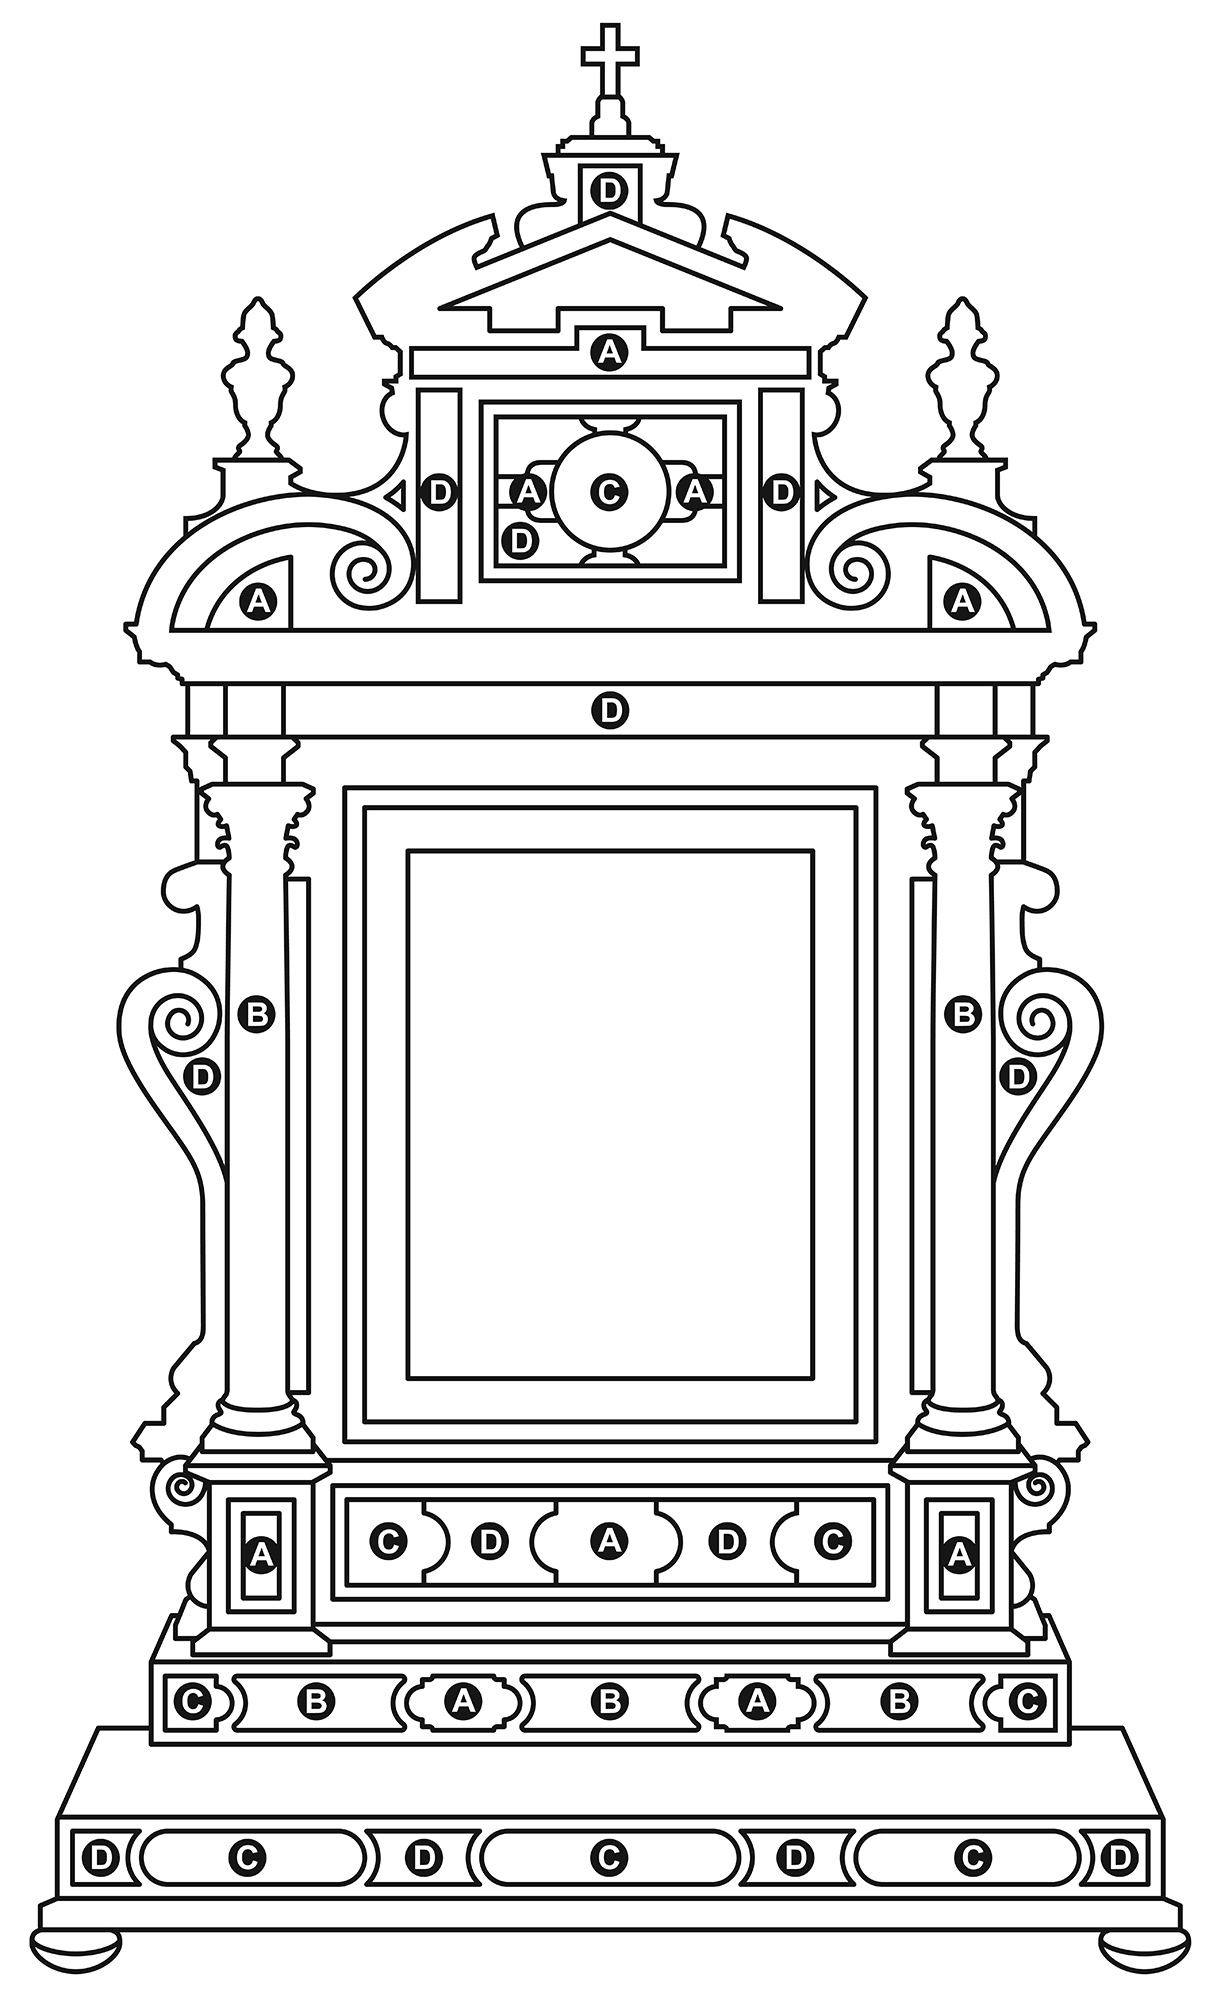 Line drawing showing the different types of stones present in the frame.